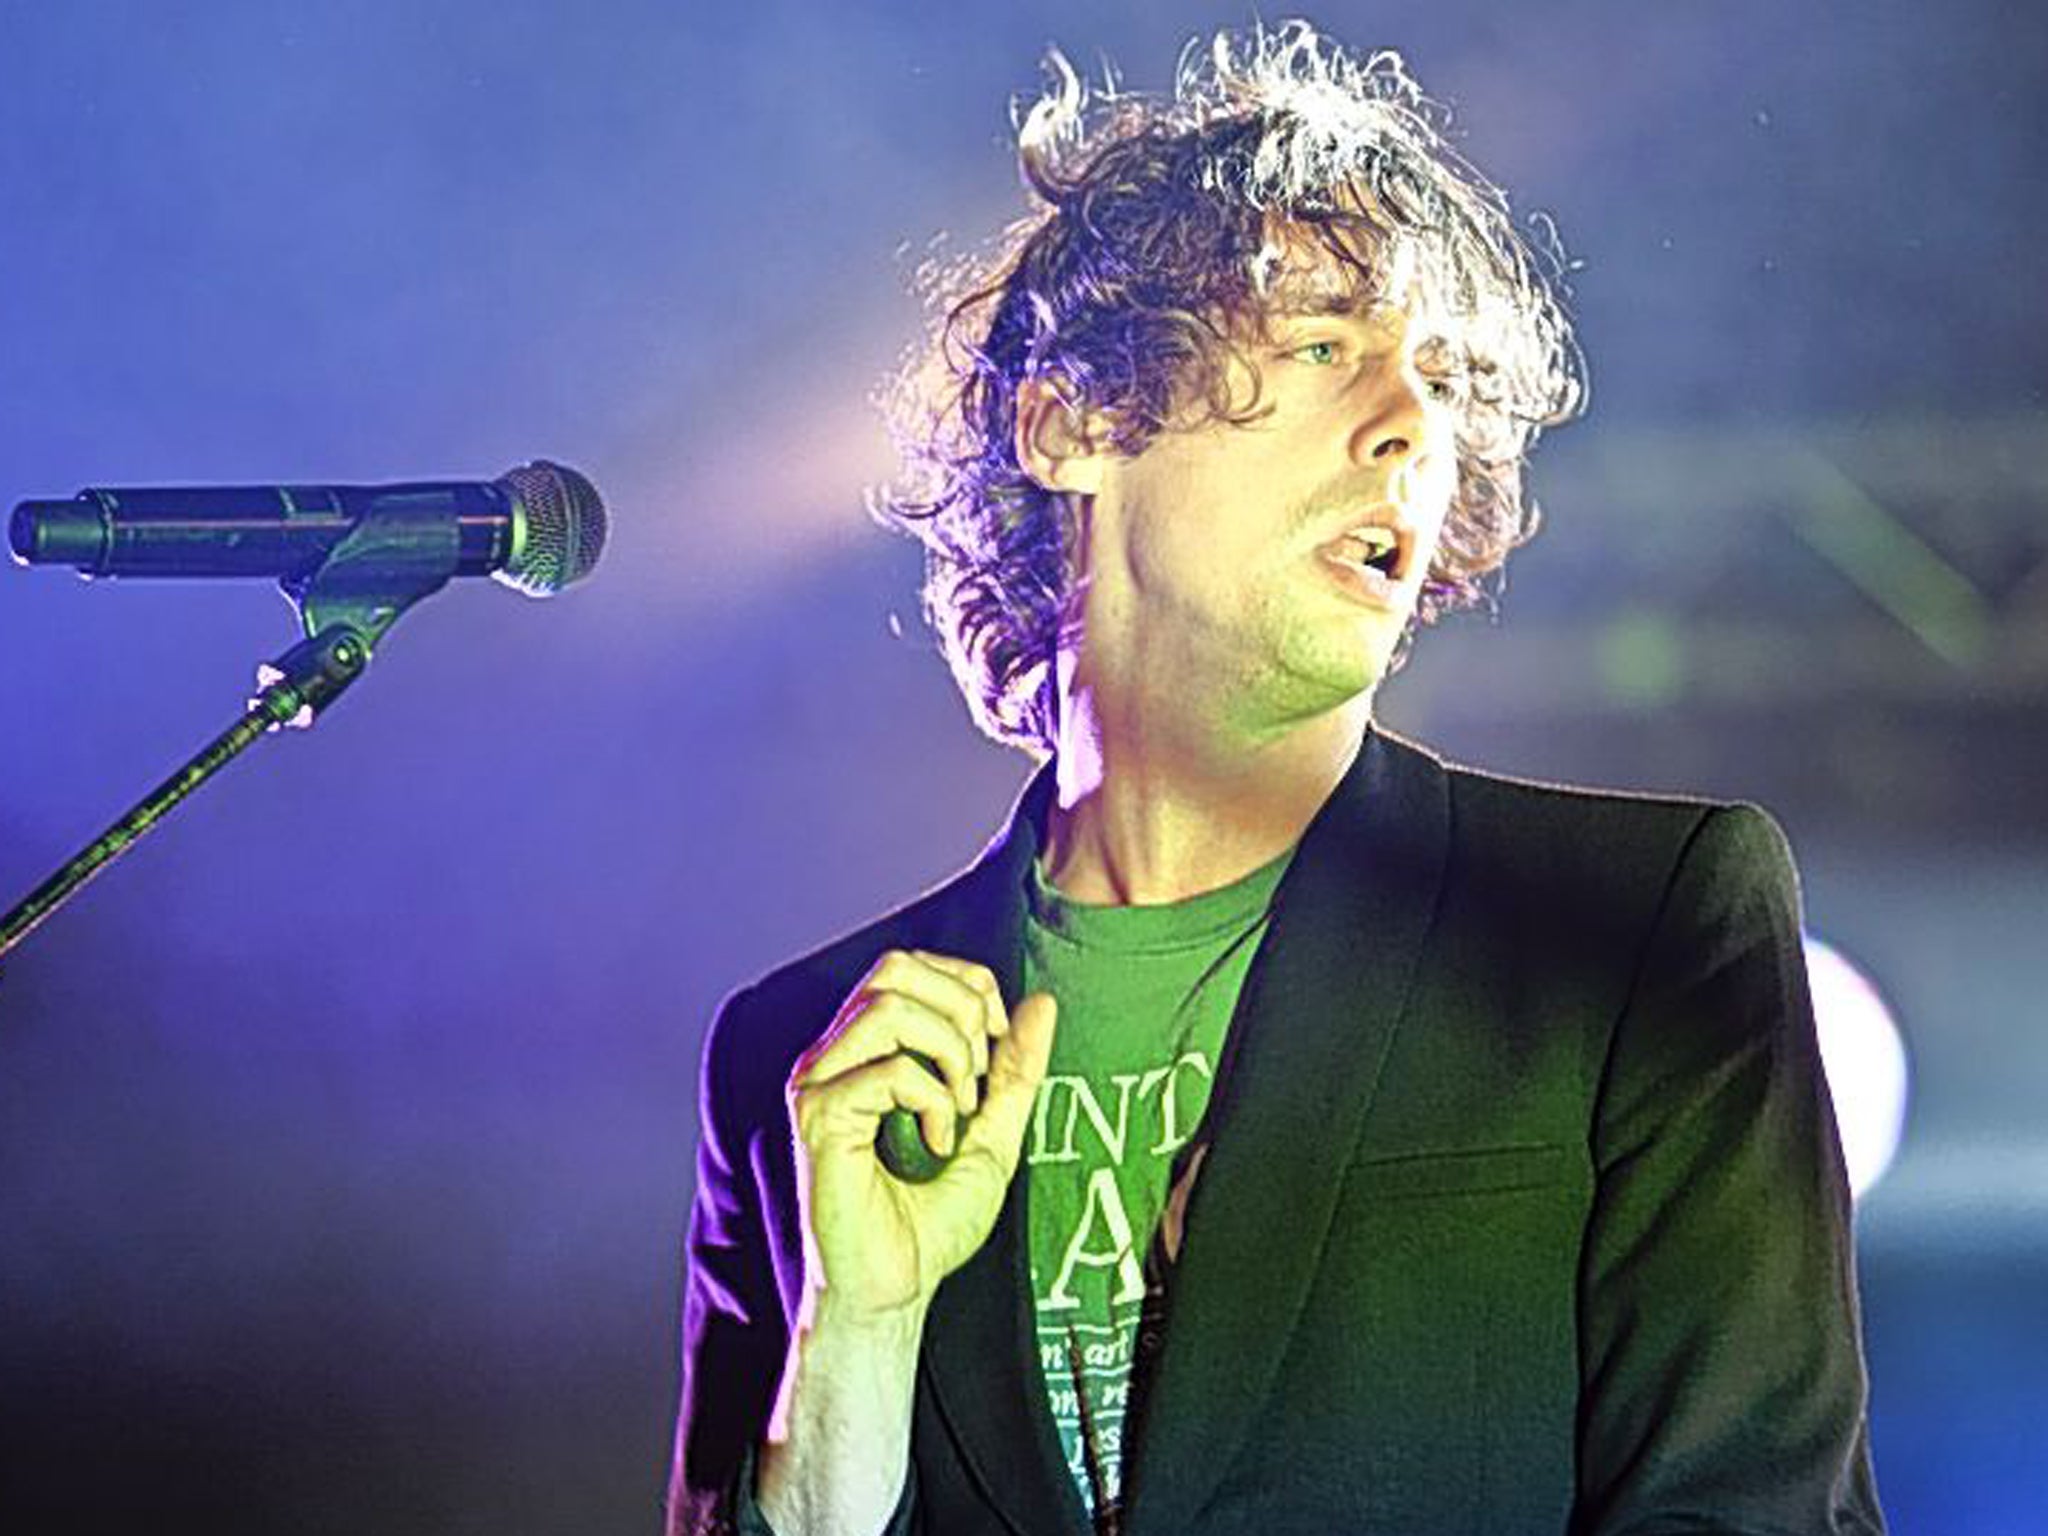 In at the sharp end: Johnny Borrell performs on stage